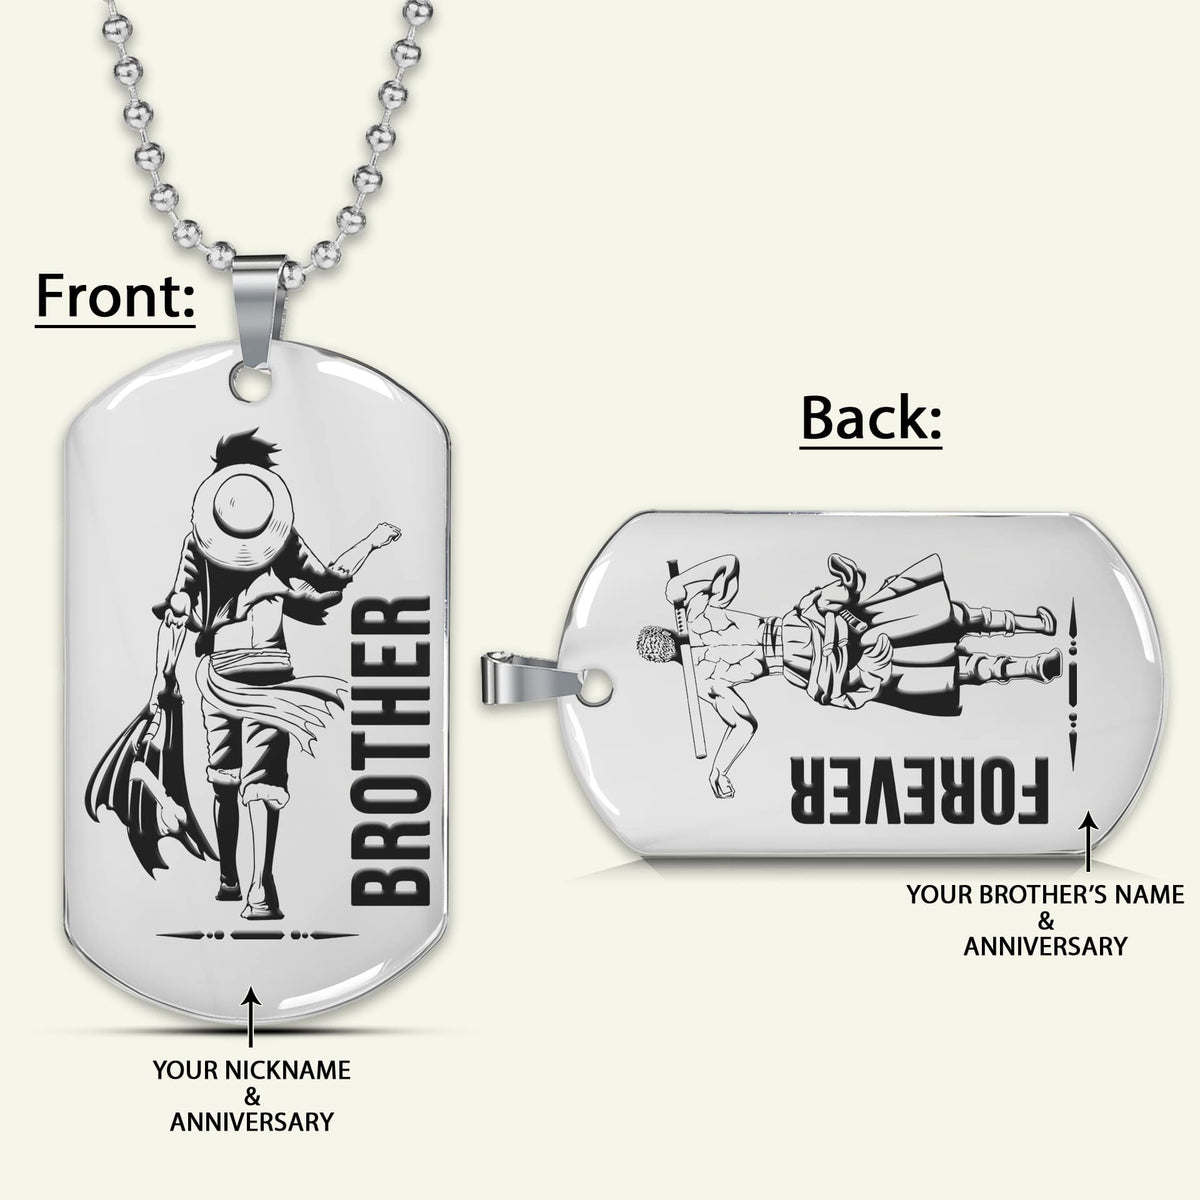 OPD020 - Brother Forever - Monkey D. Luffy - Roronoa Zoro - One Piece Dog Tag - Engrave Double Sided Silver Dog Tag